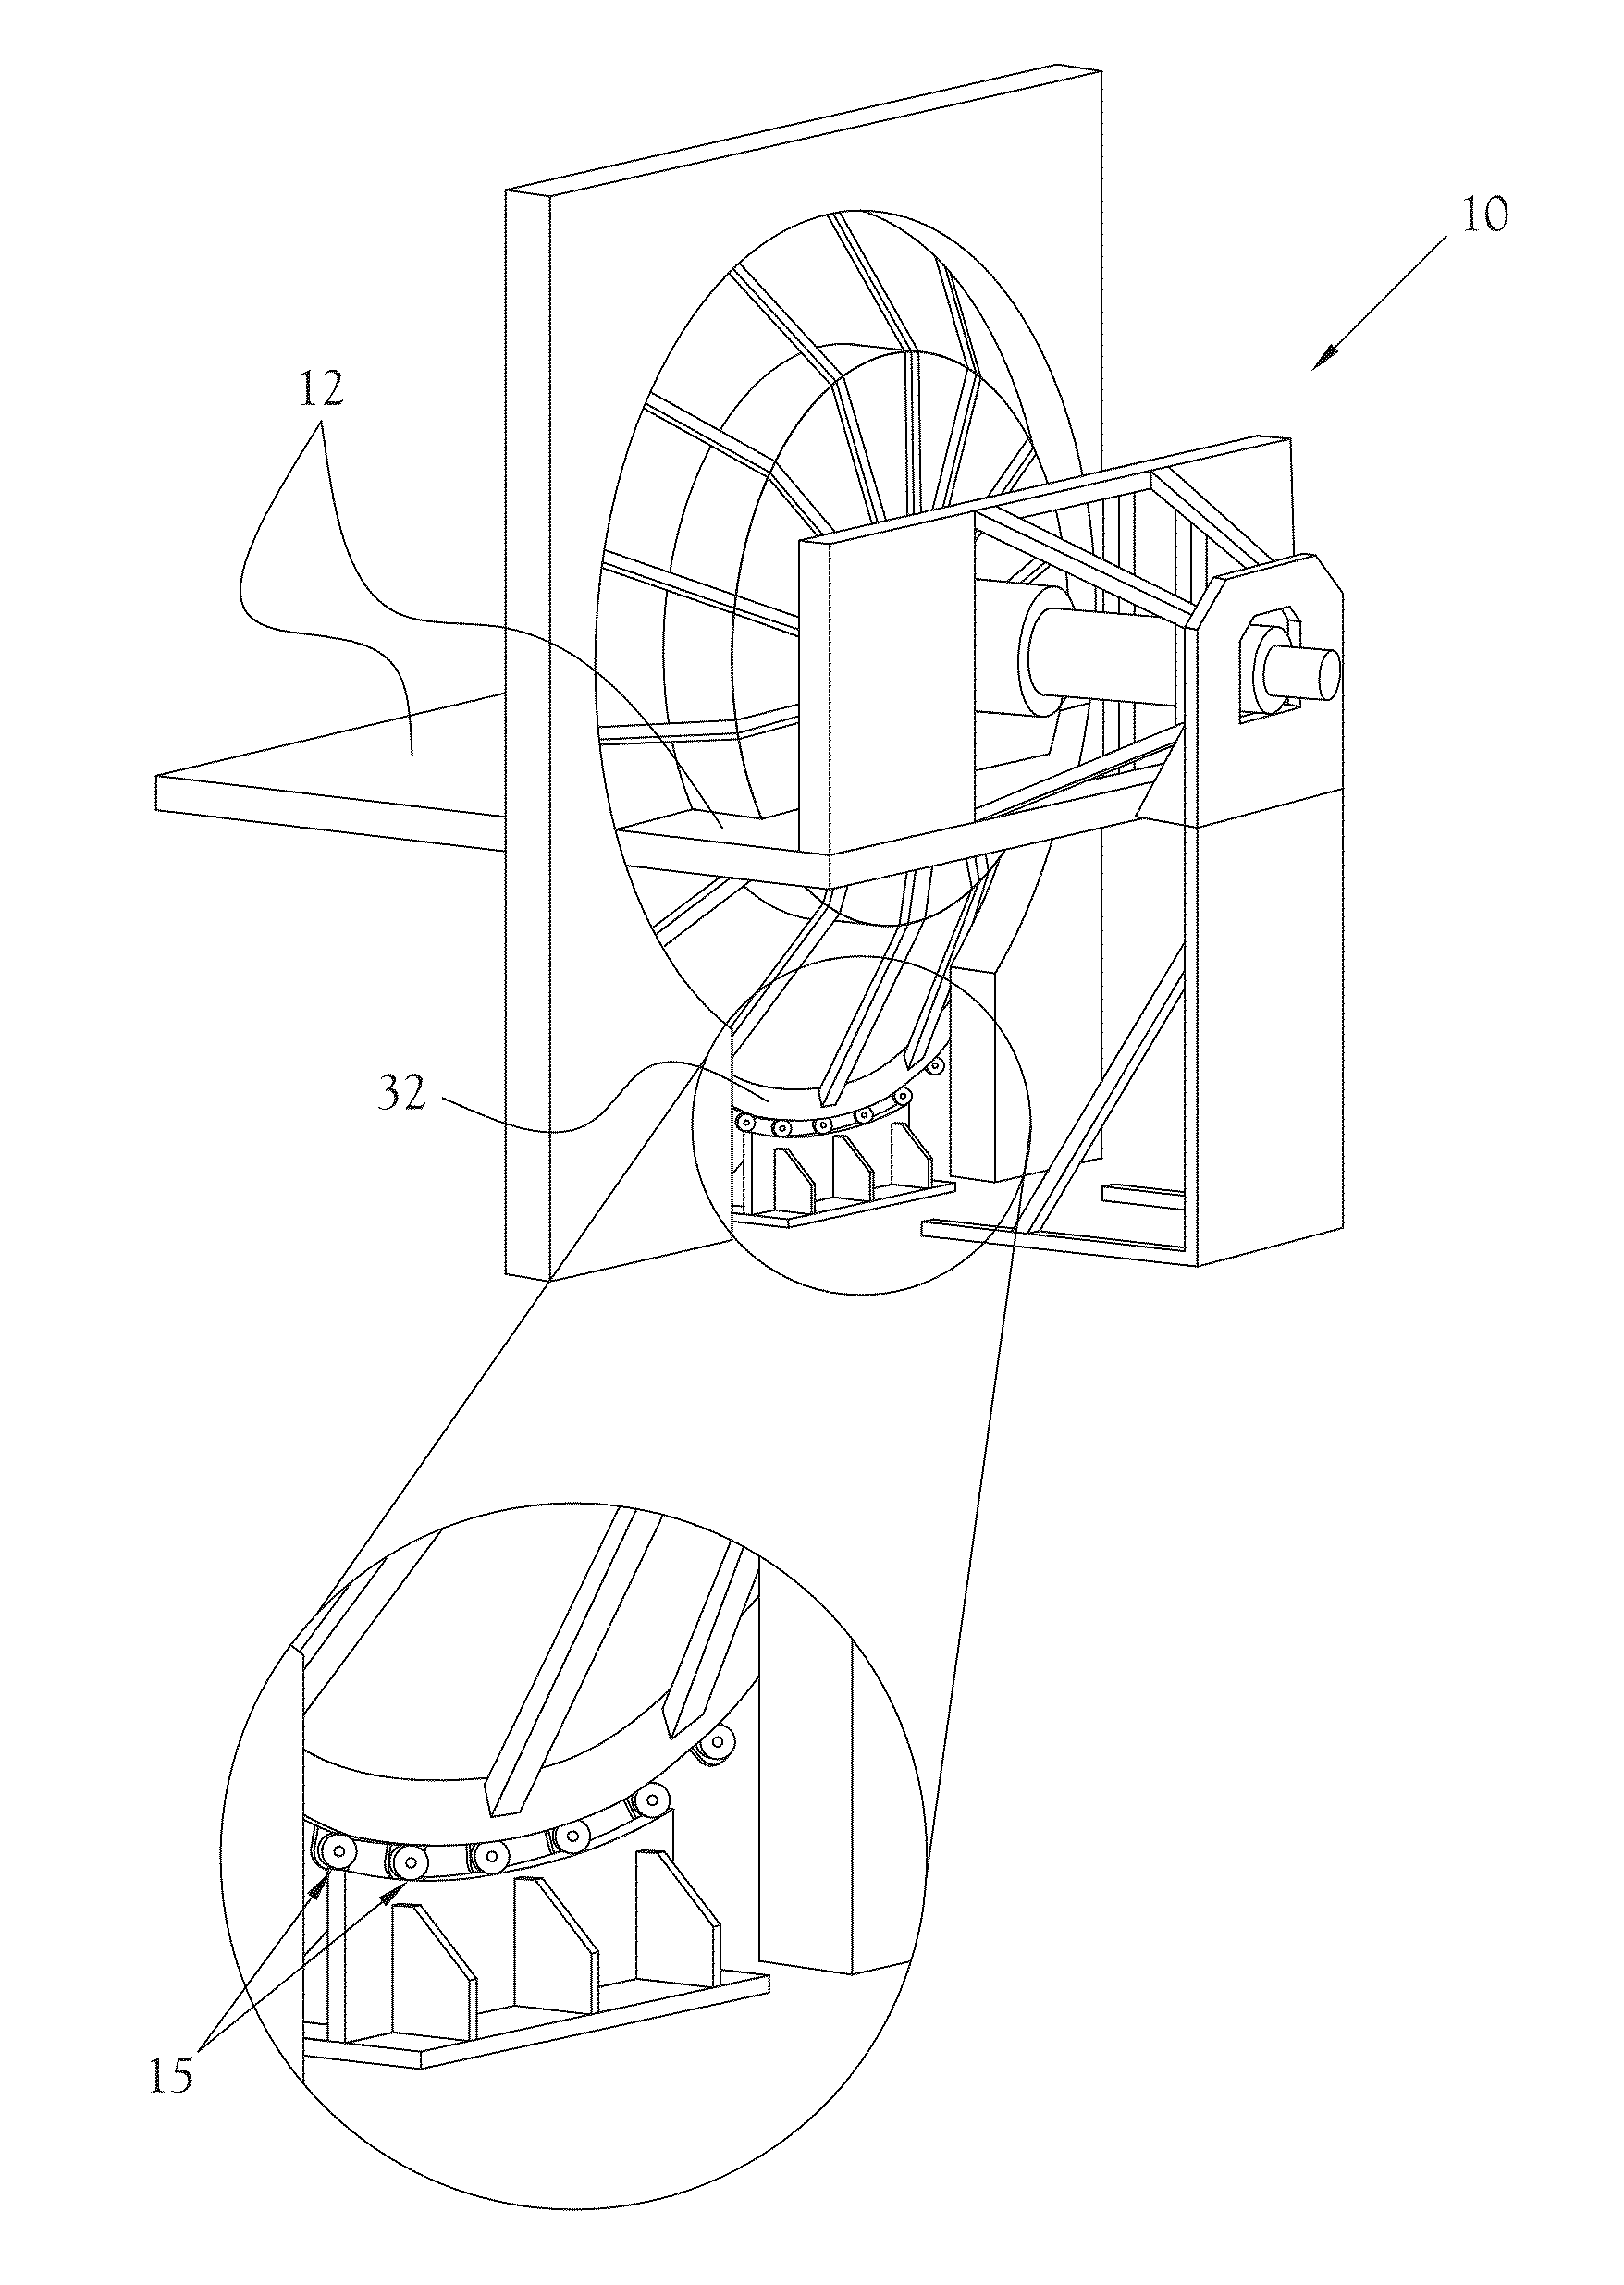 Systems and methods of adjusting a rotating gantry system